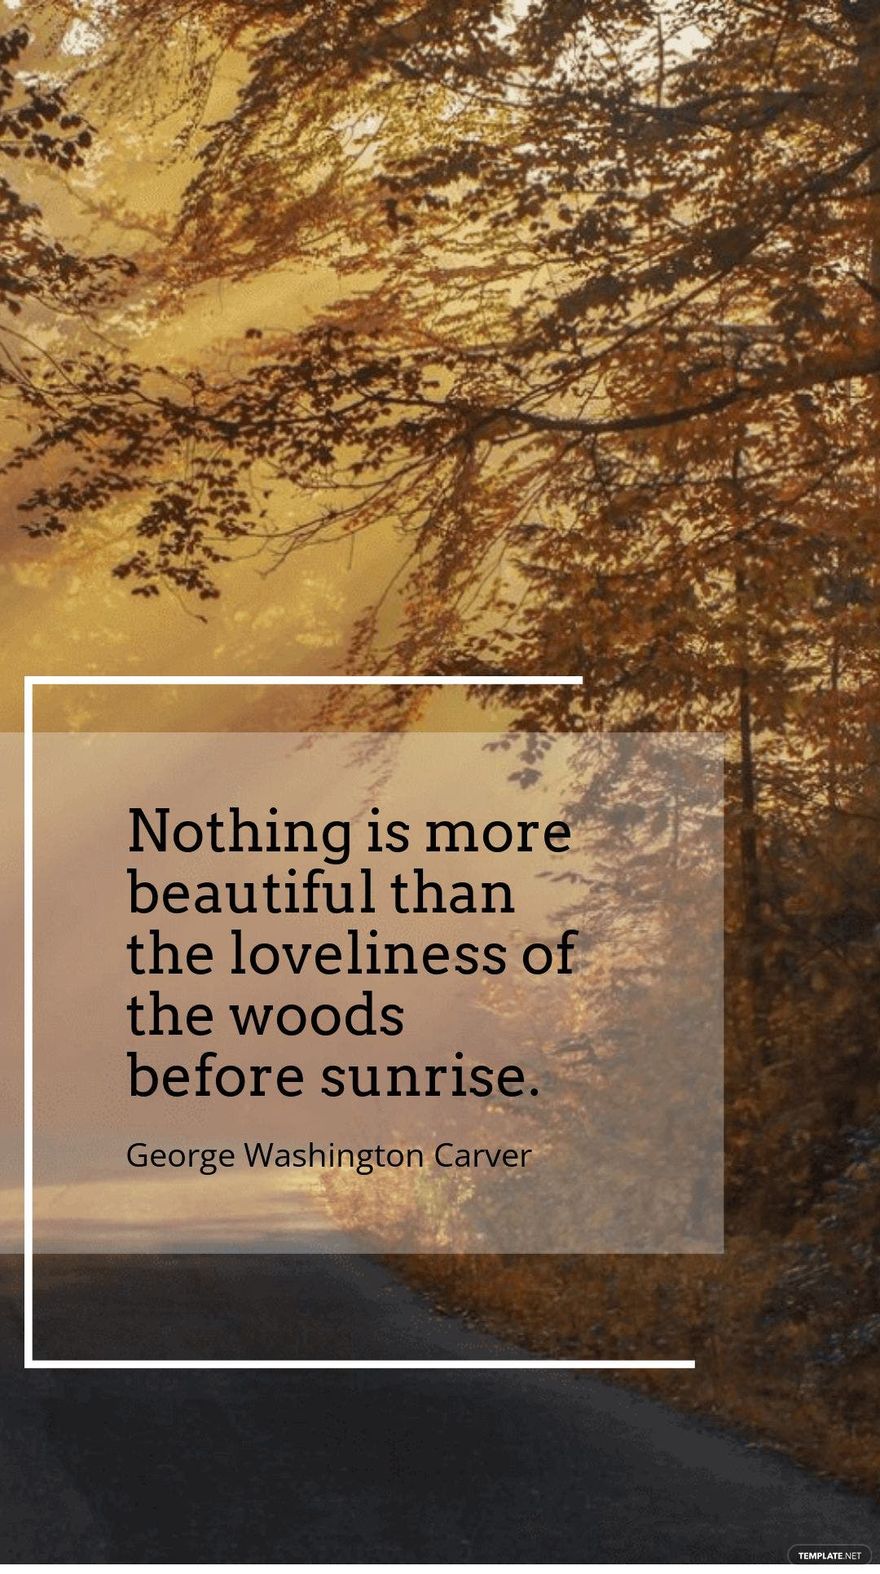 George Washington Carver - Nothing is more beautiful than the loveliness of the woods before sunrise.